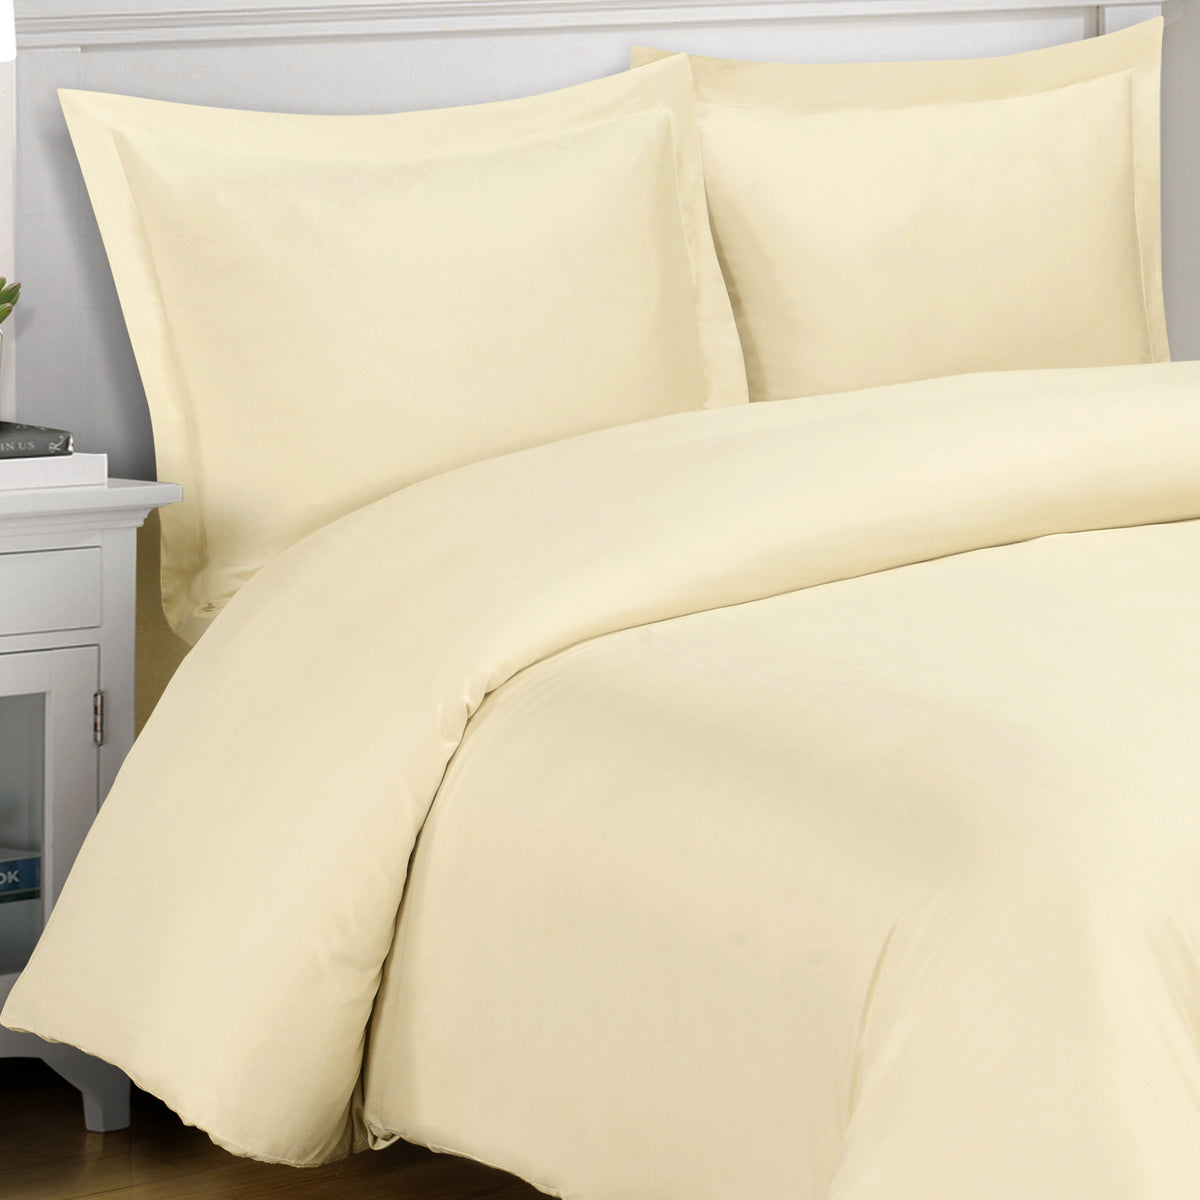 Buy 32" Inches Pocket Queen Ivory Fitted Sheets Egyptian Cotton 1000TC at-EgyptianHomeLinens.com